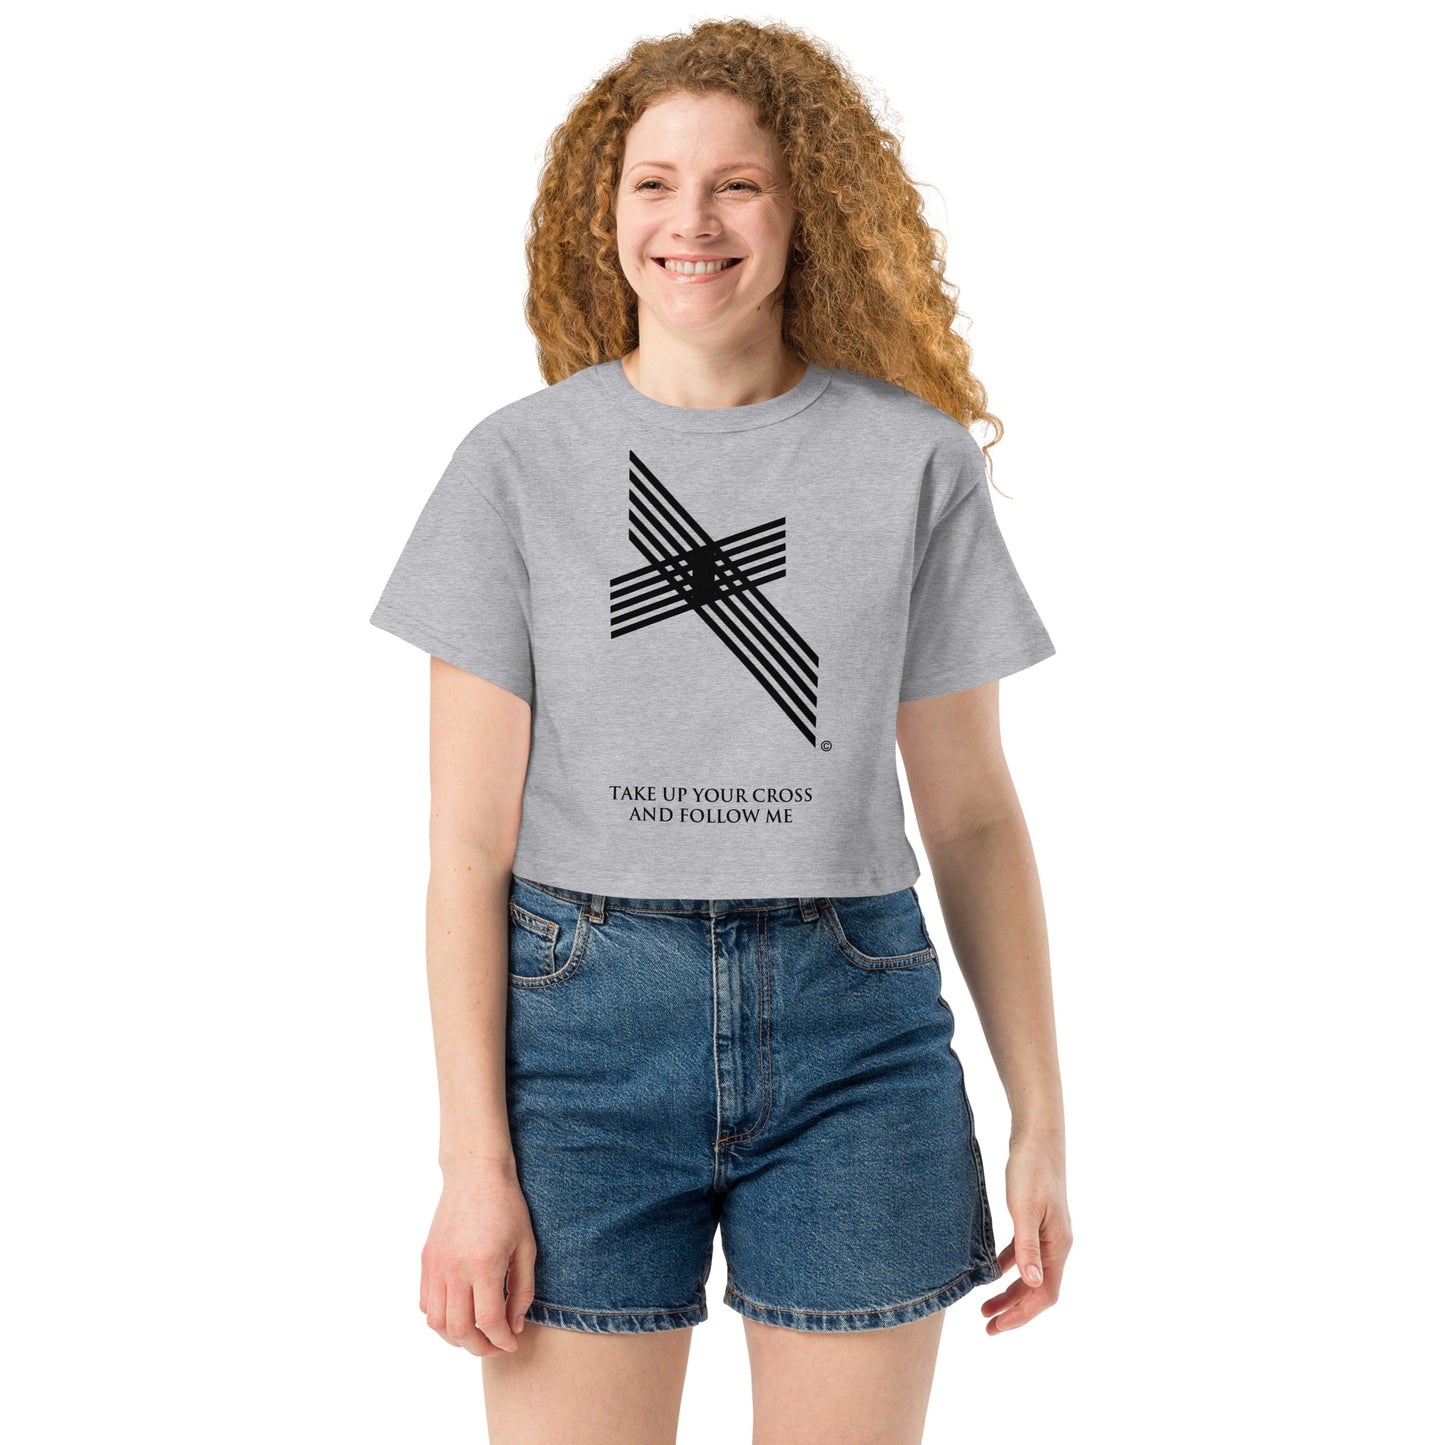 Take Up Your Cross Champion Crop Top